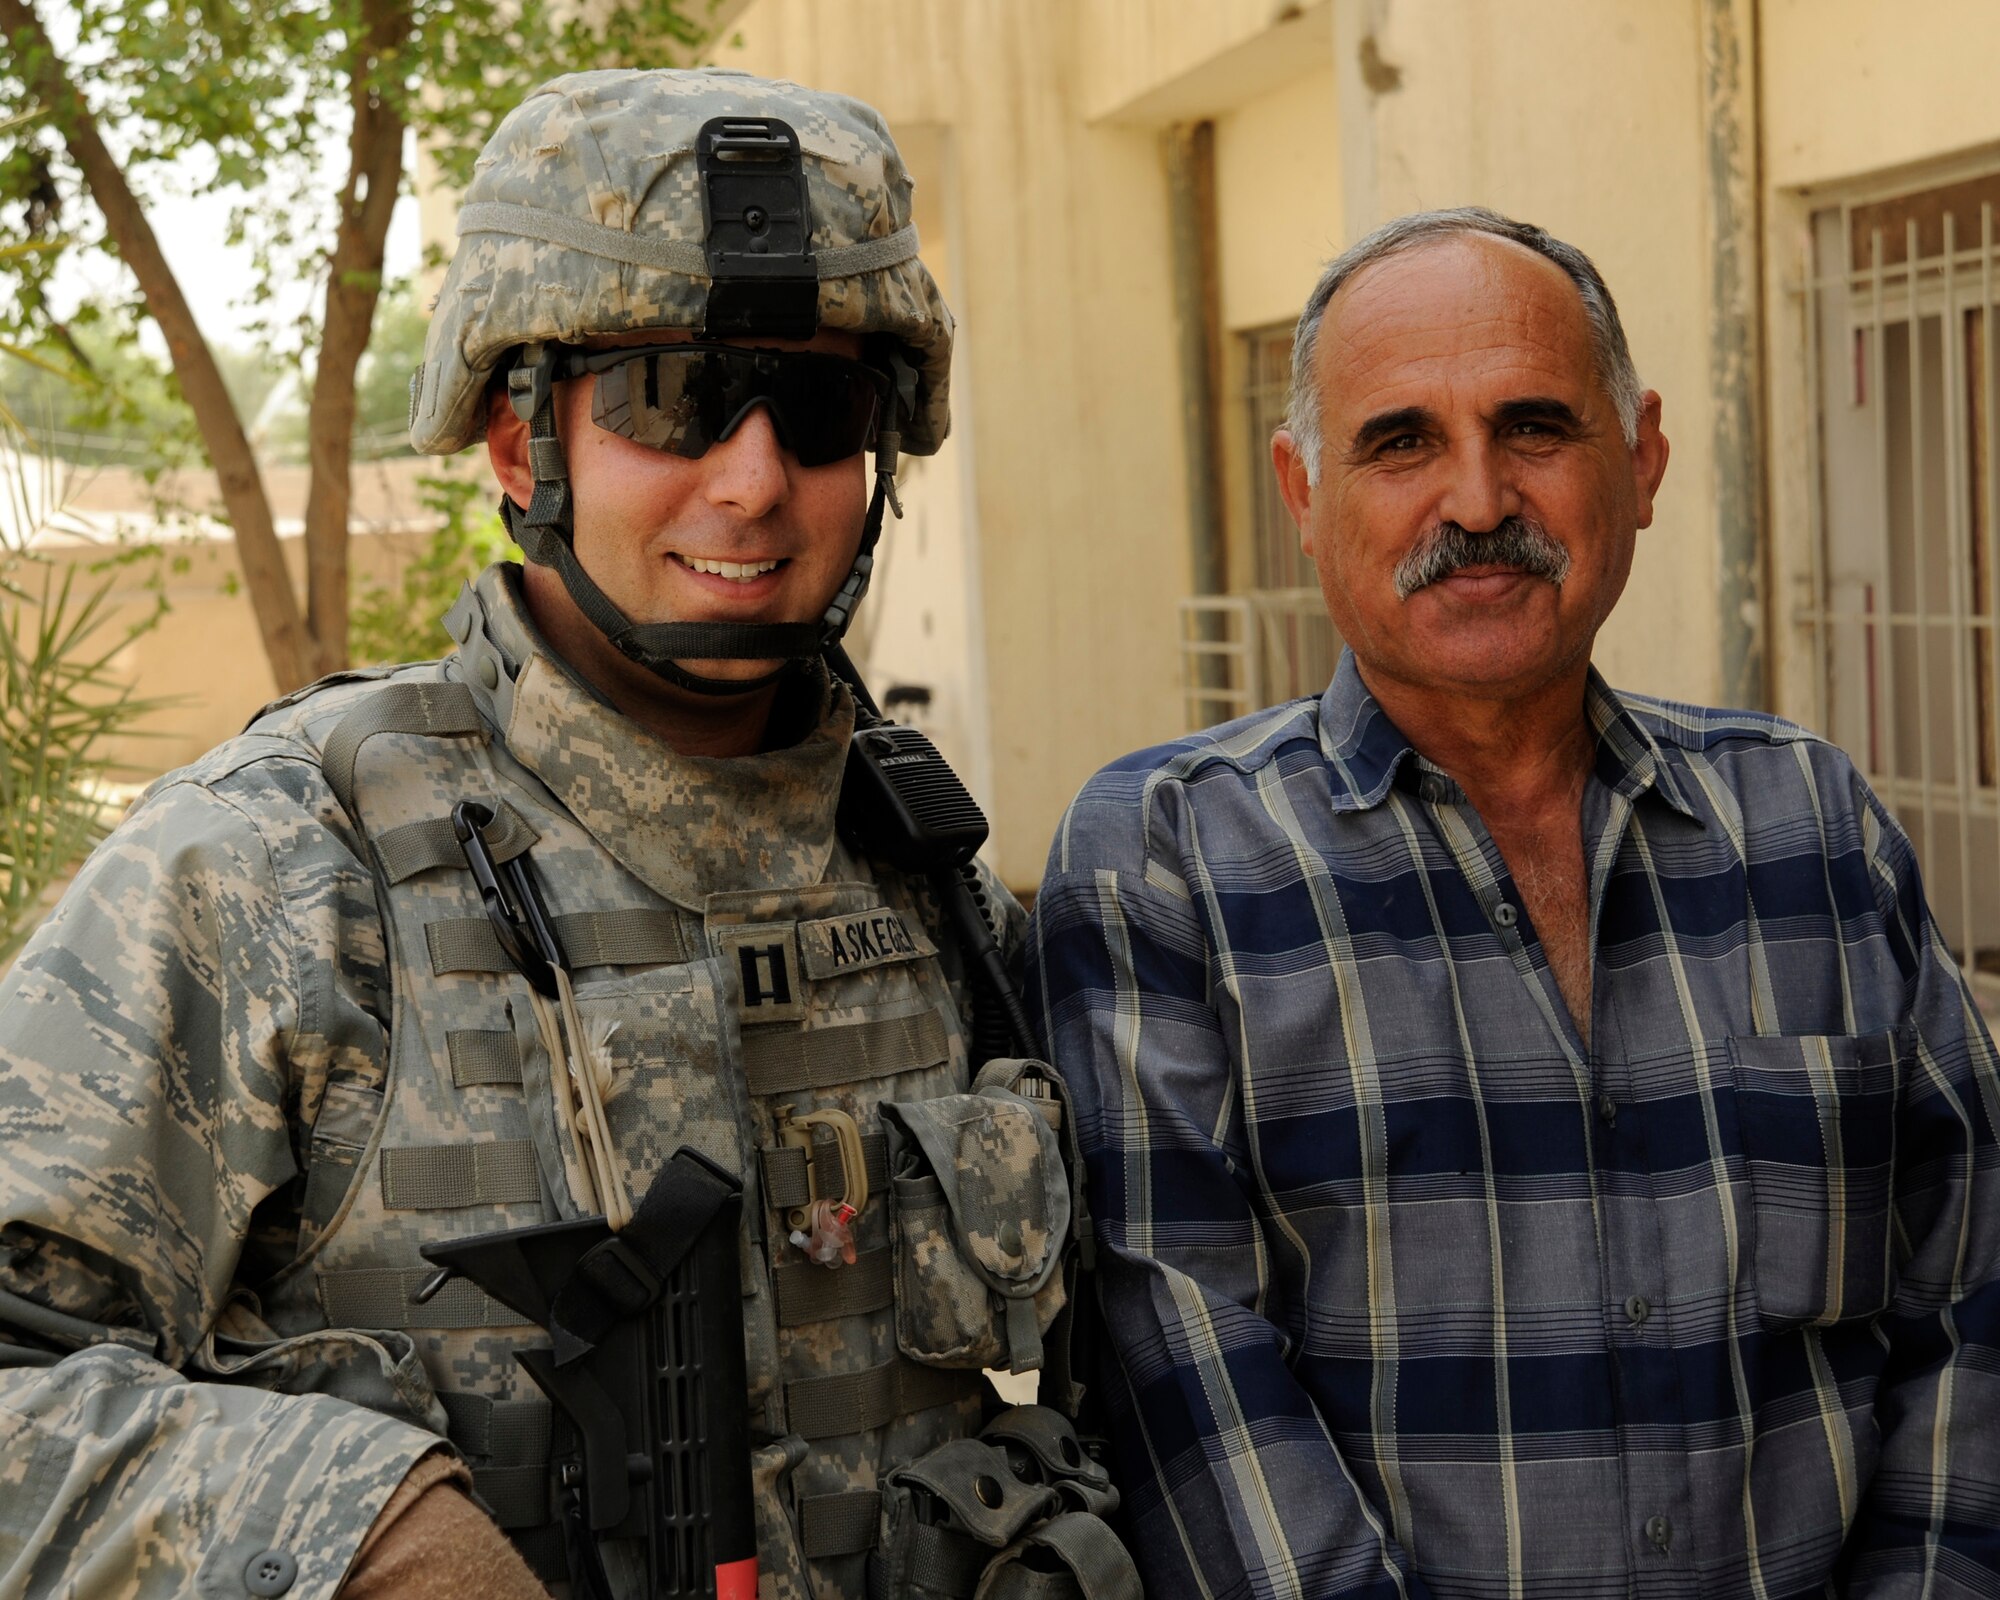 HAWR RAJAB, IRAQ -- U.S. Air Force Capt. Michael Askegren, Patrol Base Stone site officer in charge, left, poses for a photo with Hatam, city council reconstruction chairman, at the Al Ma'ang Boys School in the city of Hawr Rajab, Iraq on Aug. 24. Askegren, a Mandeville, La. native, is deployed from the 823rd RED HORSE squadron, Hurlburt Field, Fla. where he is a project engineer. (U.S. Air Force photo/Staff Sgt. Paul Villanueva II)